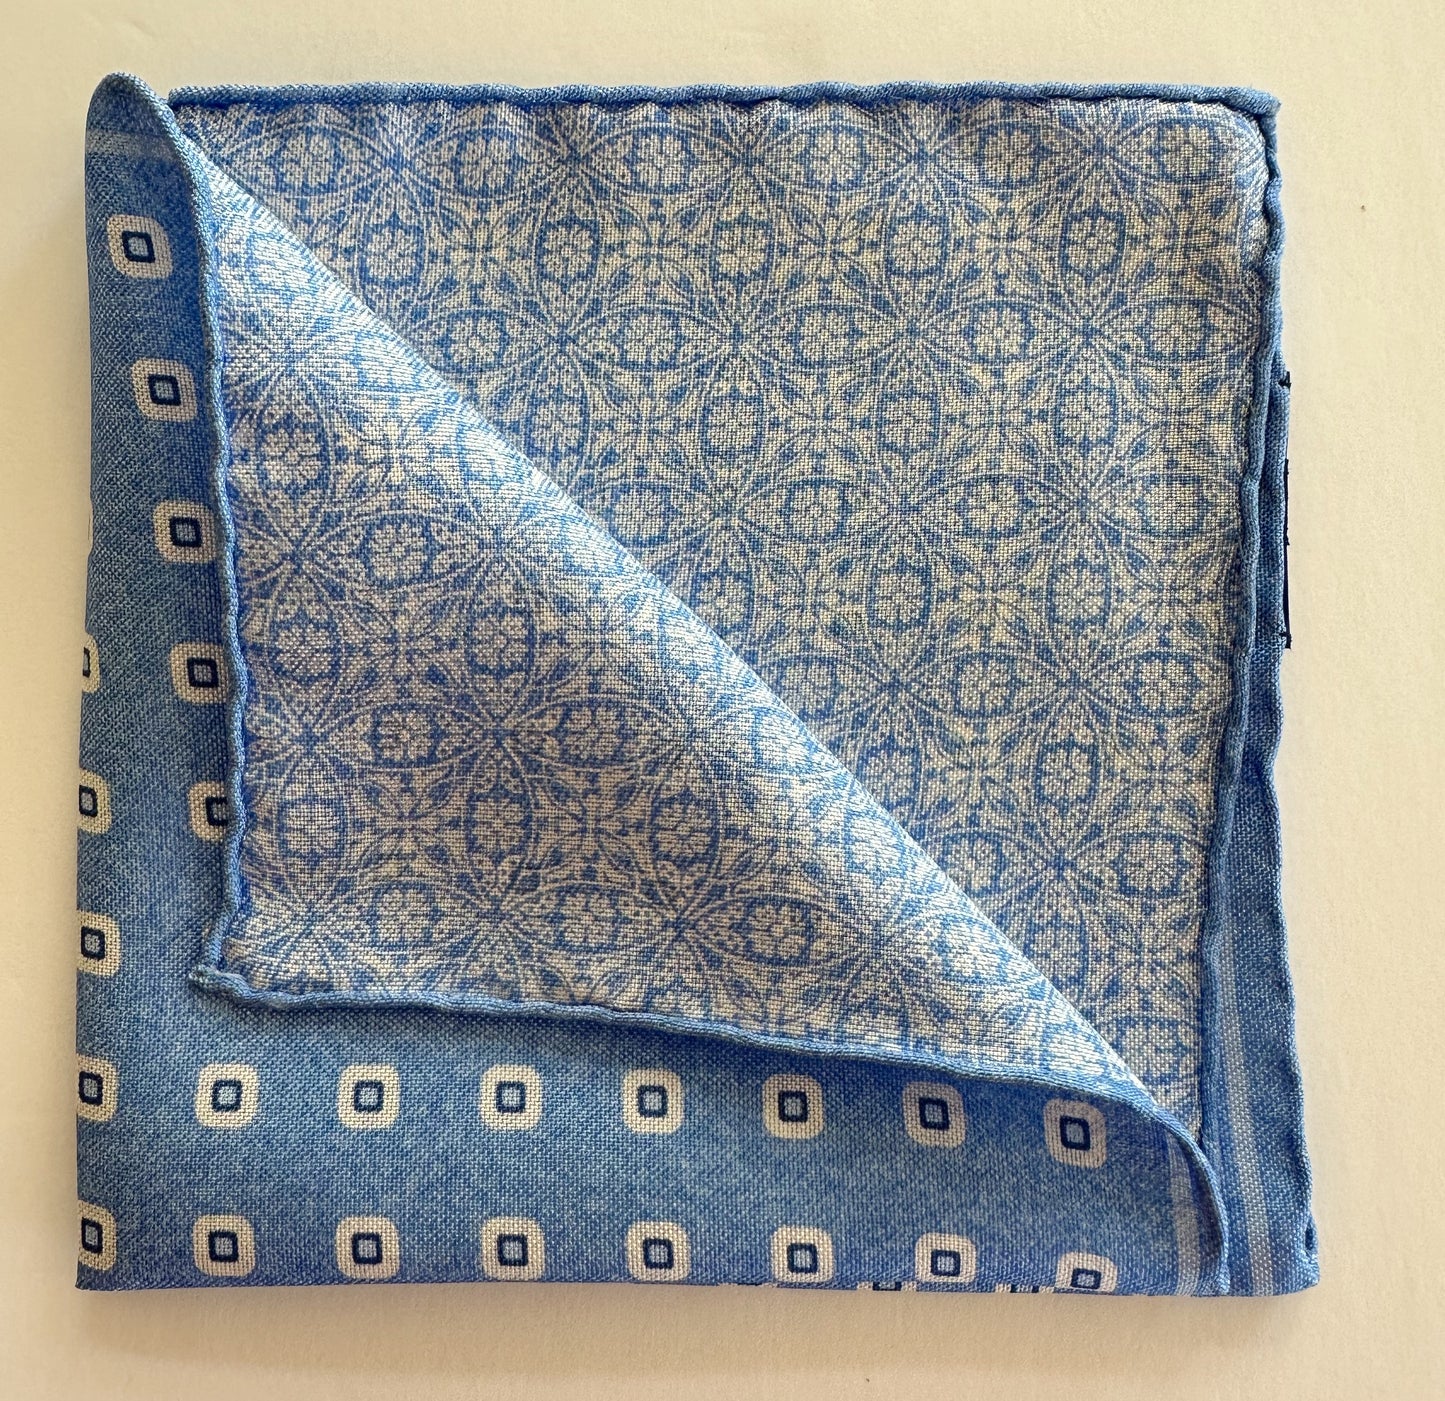 David Donahue Pocket Square - Sky Blue with Square Dots/Floral